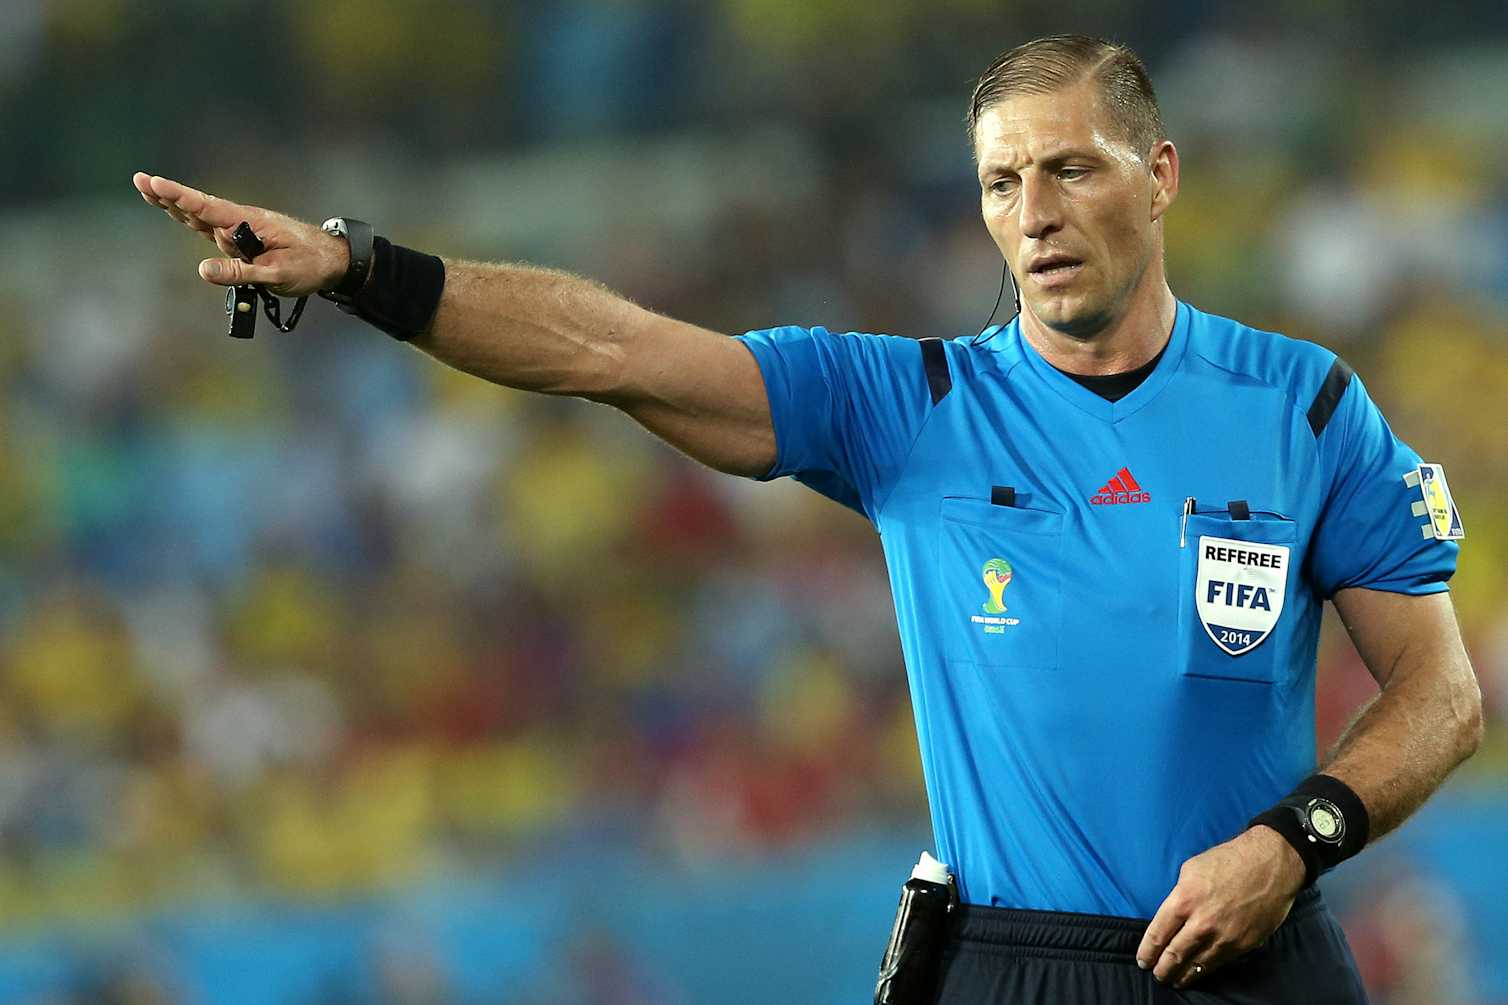 the players, World Cup referees are feeling the heat